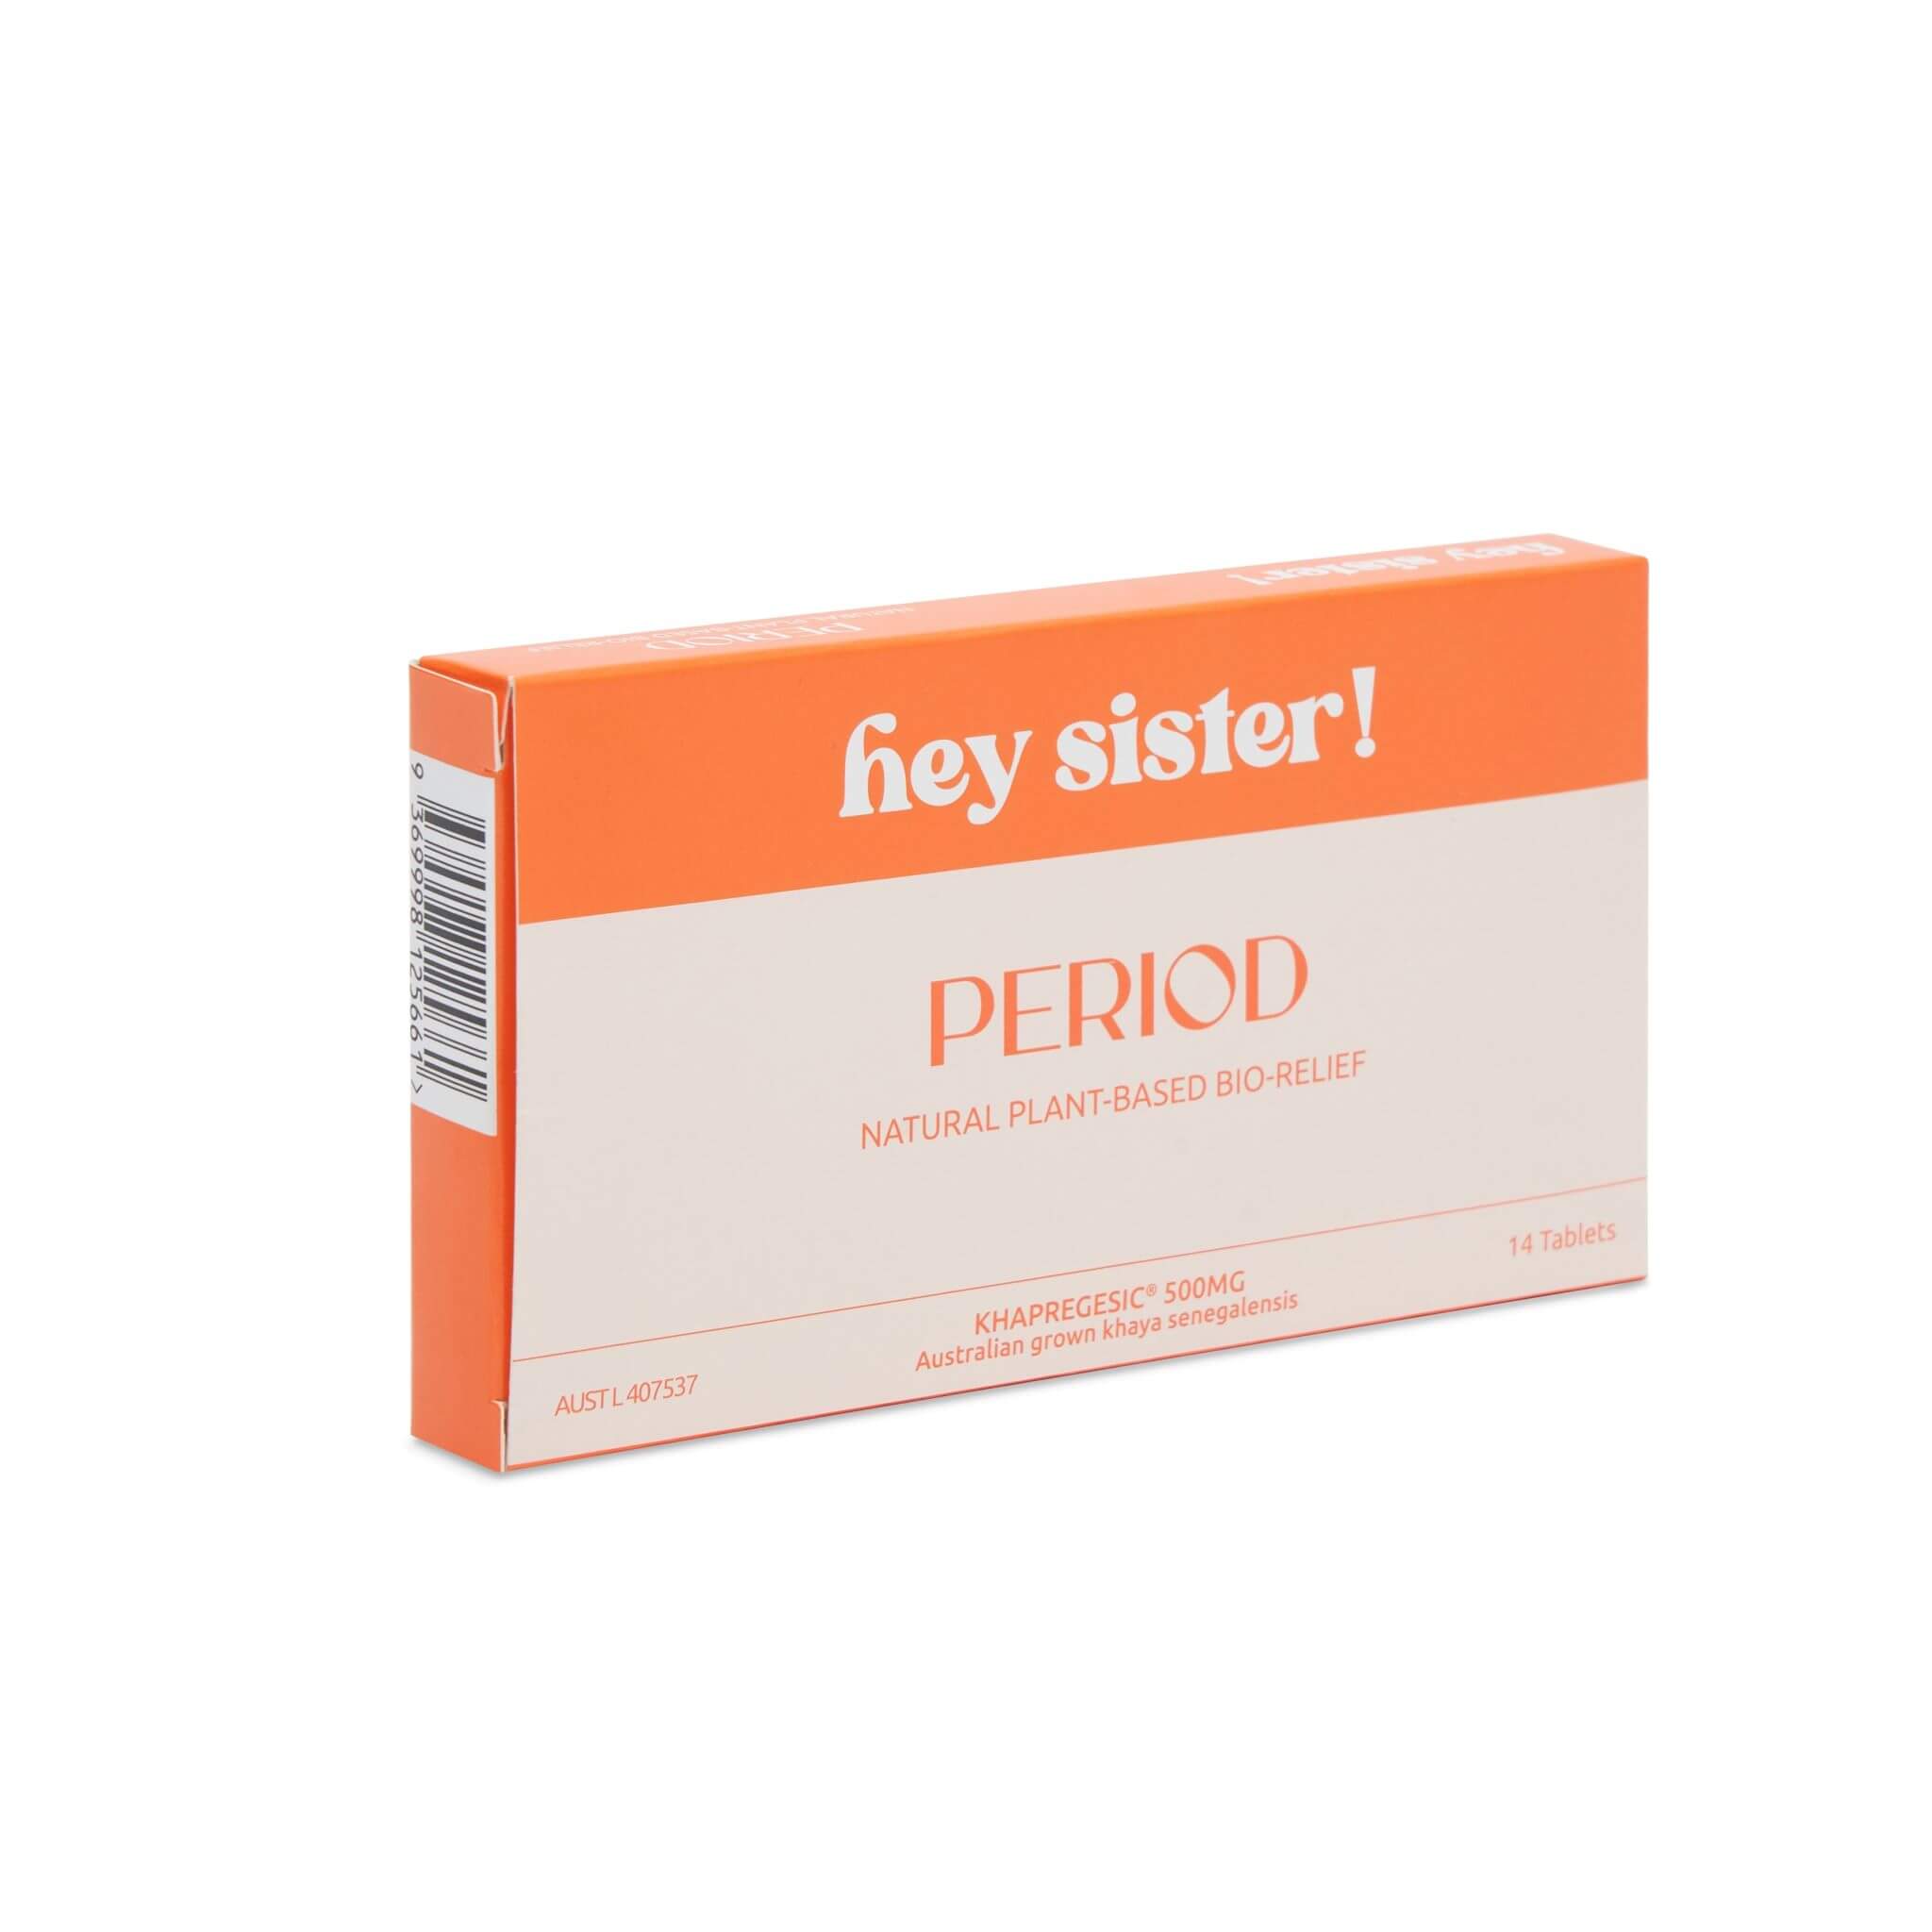 Hey Sister! Period - 1 Month